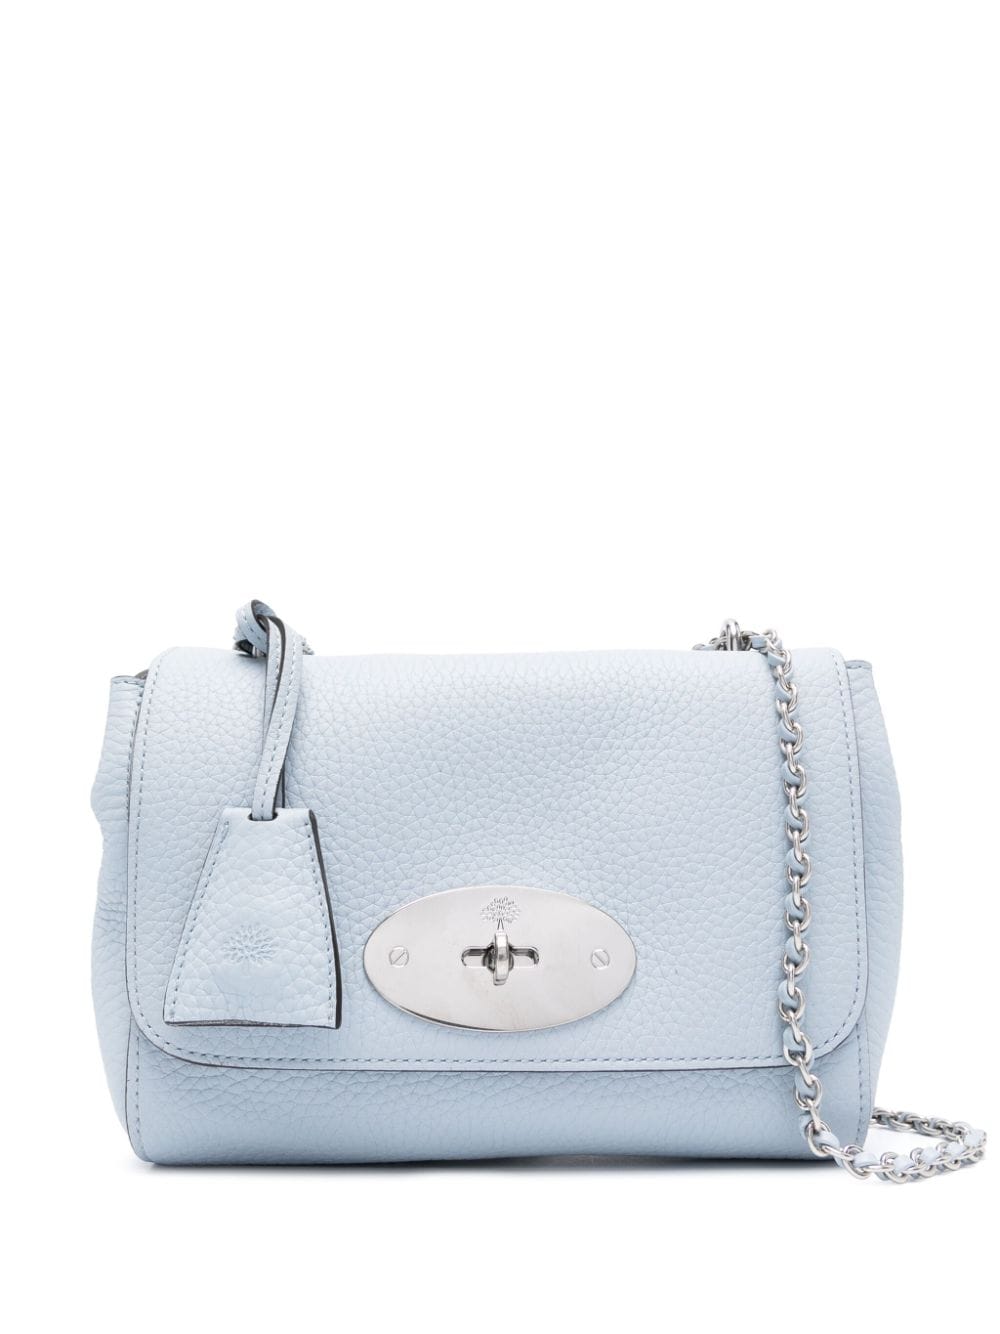 Mulberry Lily leather shoulder bag - Blue von Mulberry